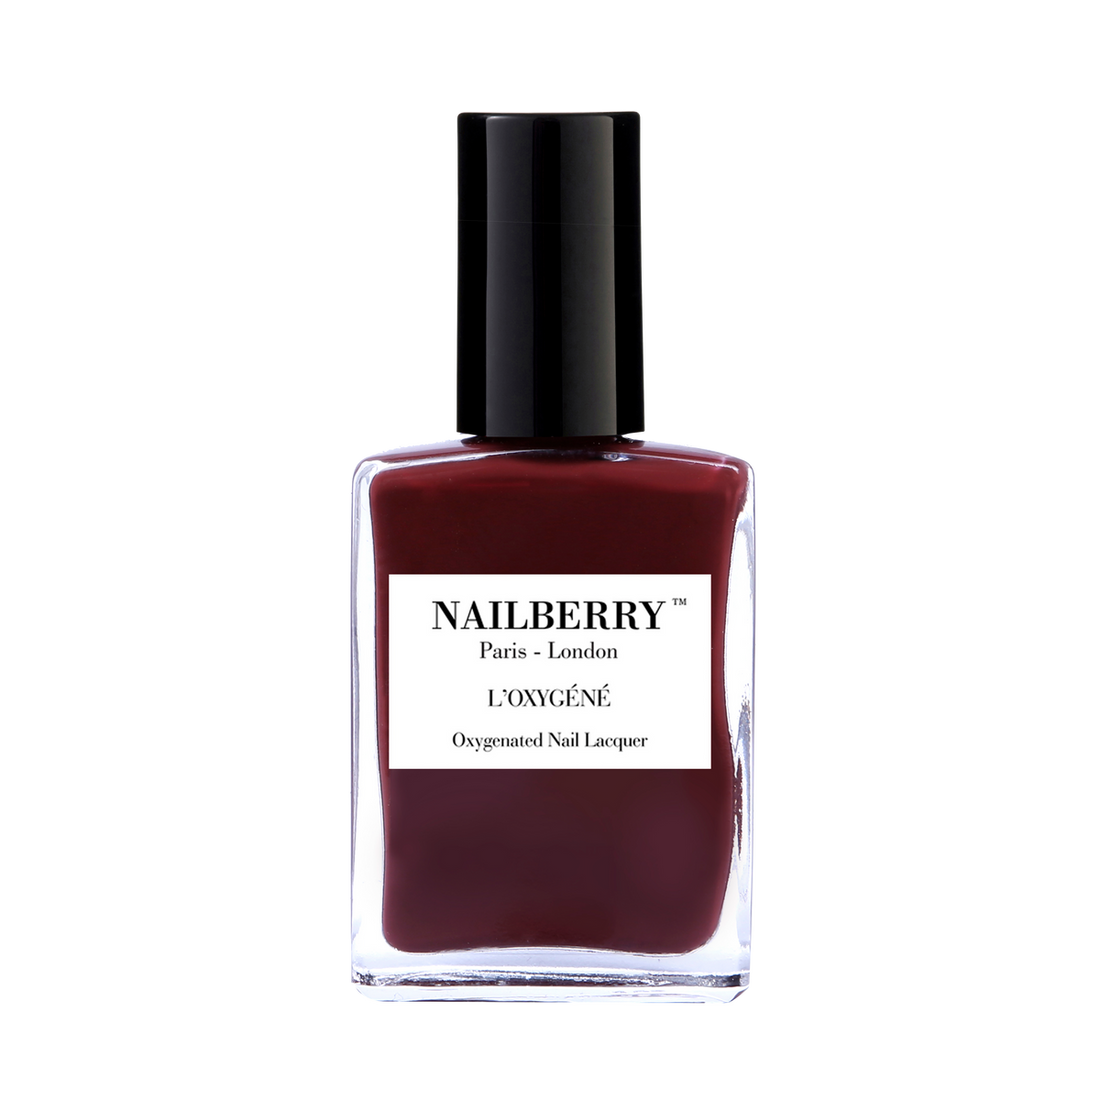 DIAL M FOR MAROON 15ml